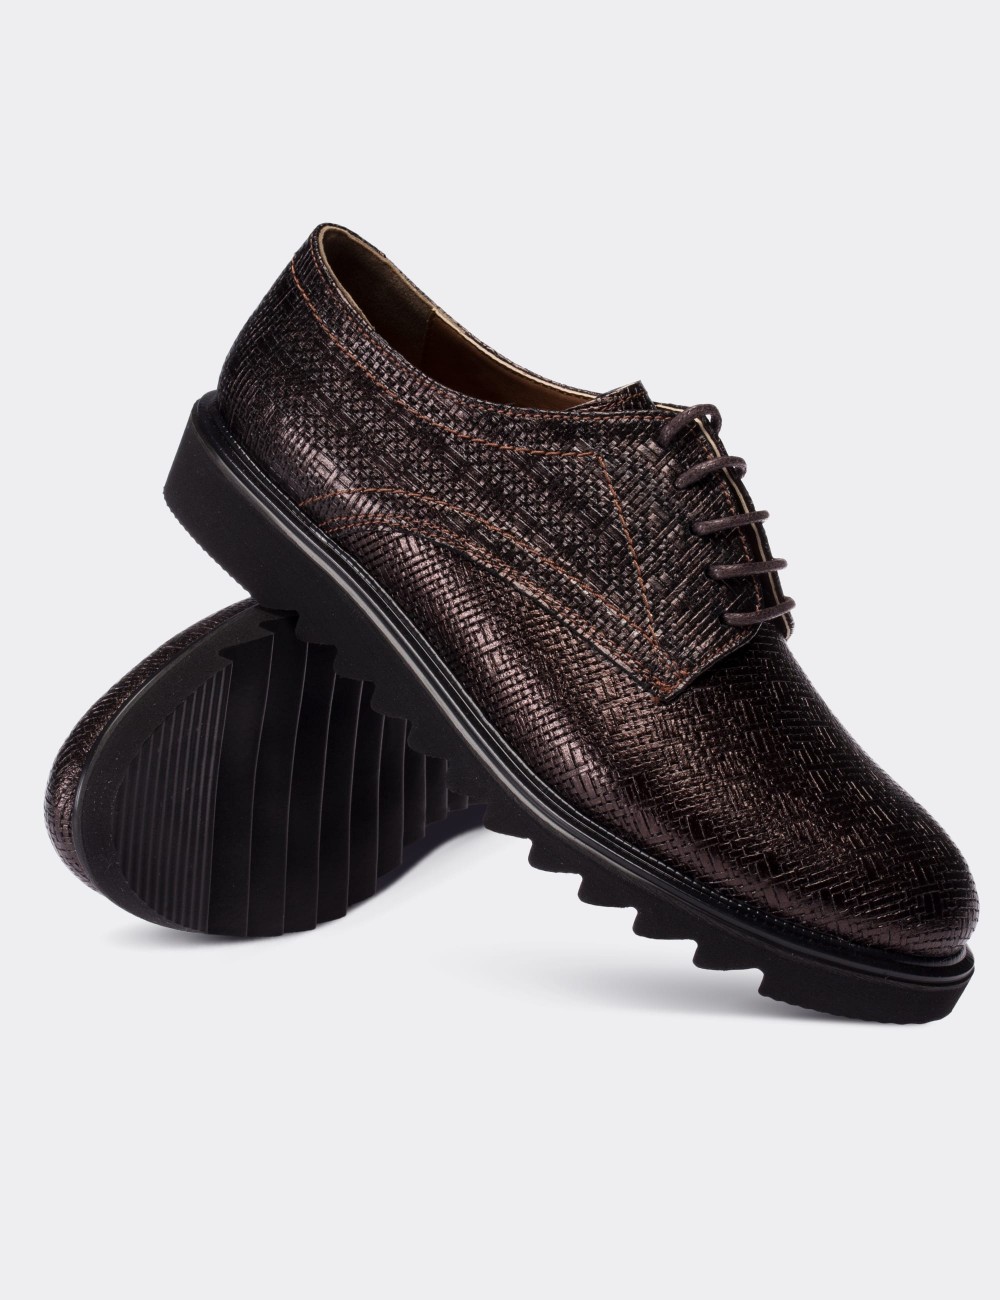 Brown  Leather Lace-up Oxford Shoes - 01430ZKHVE05